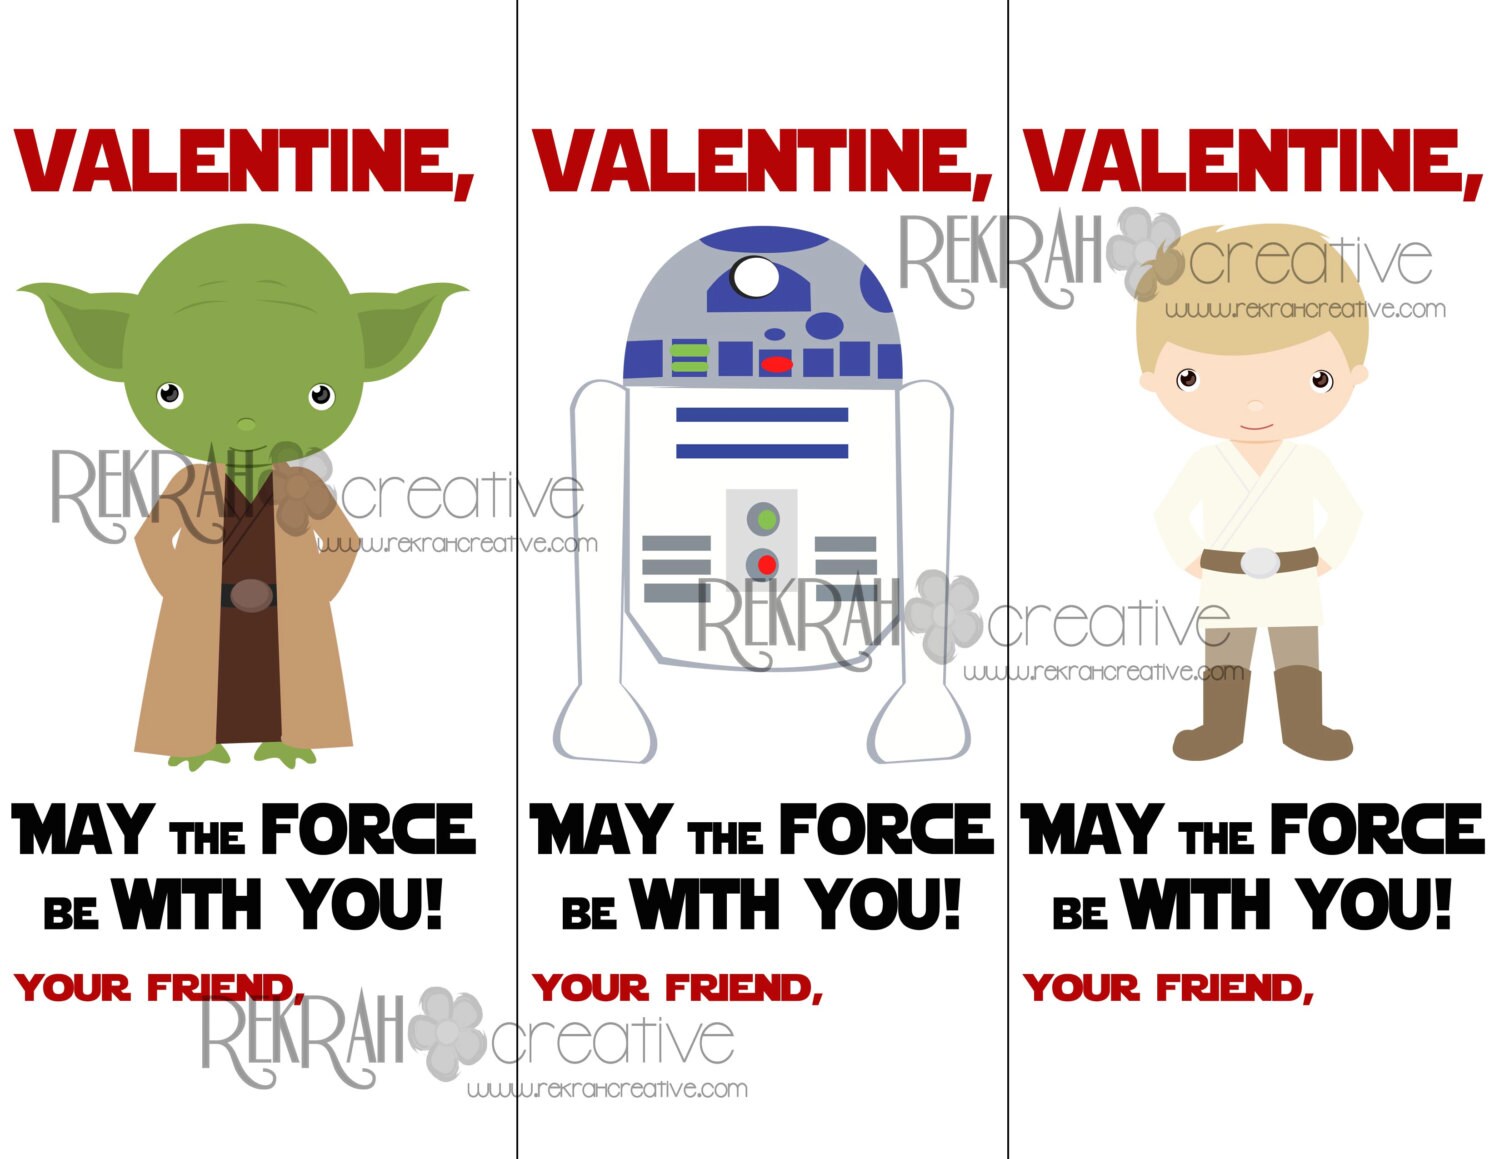 valentine-may-the-force-be-with-you-printable-kids